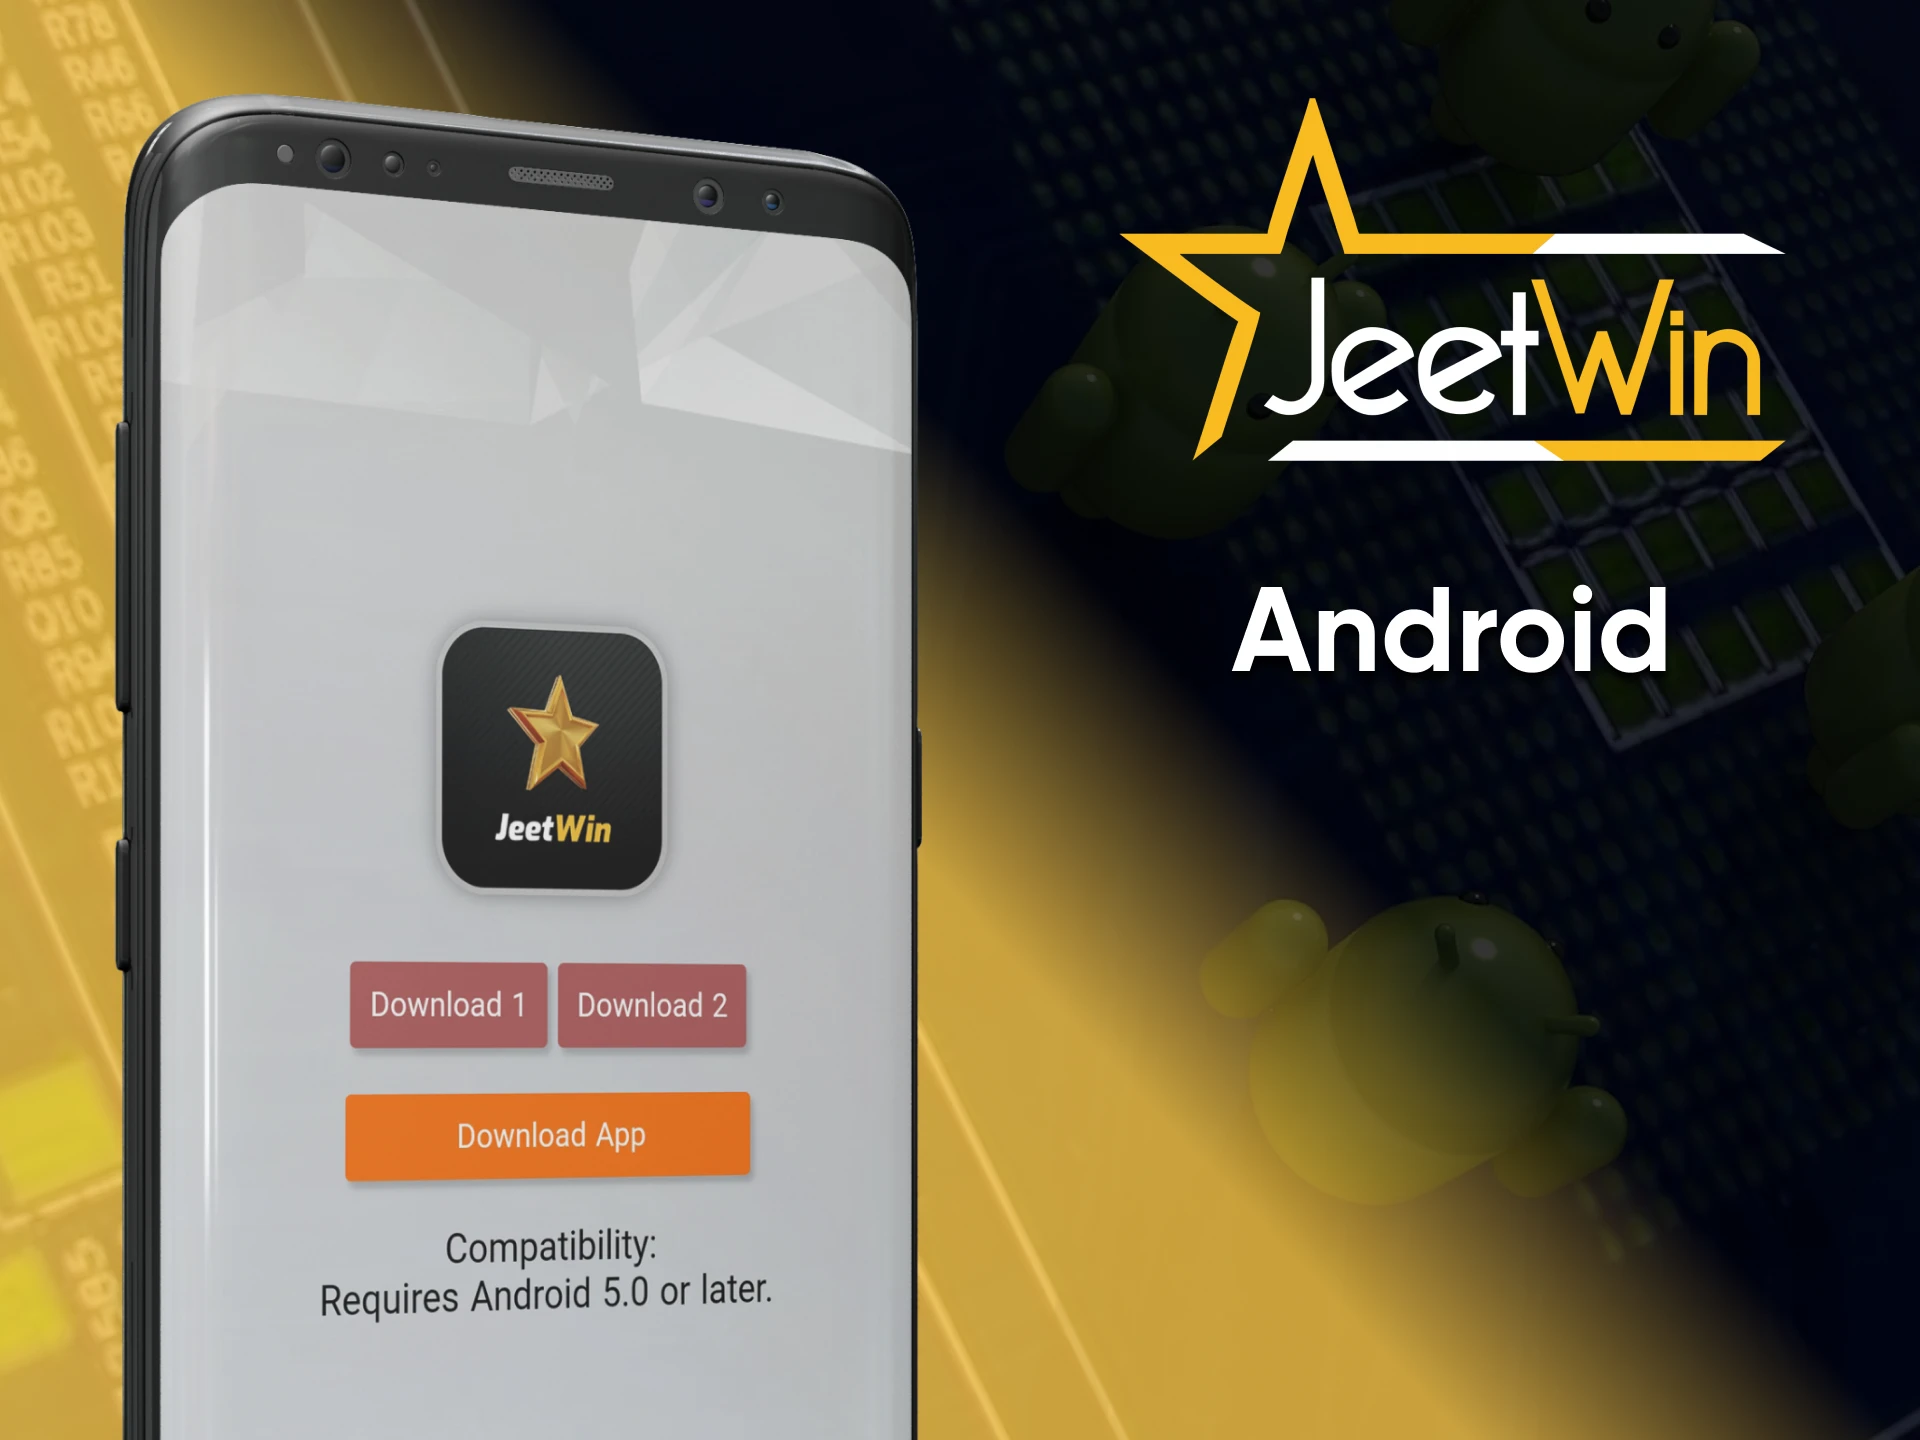 You can play at the Jettwin casino by downloading the application to your Android device.